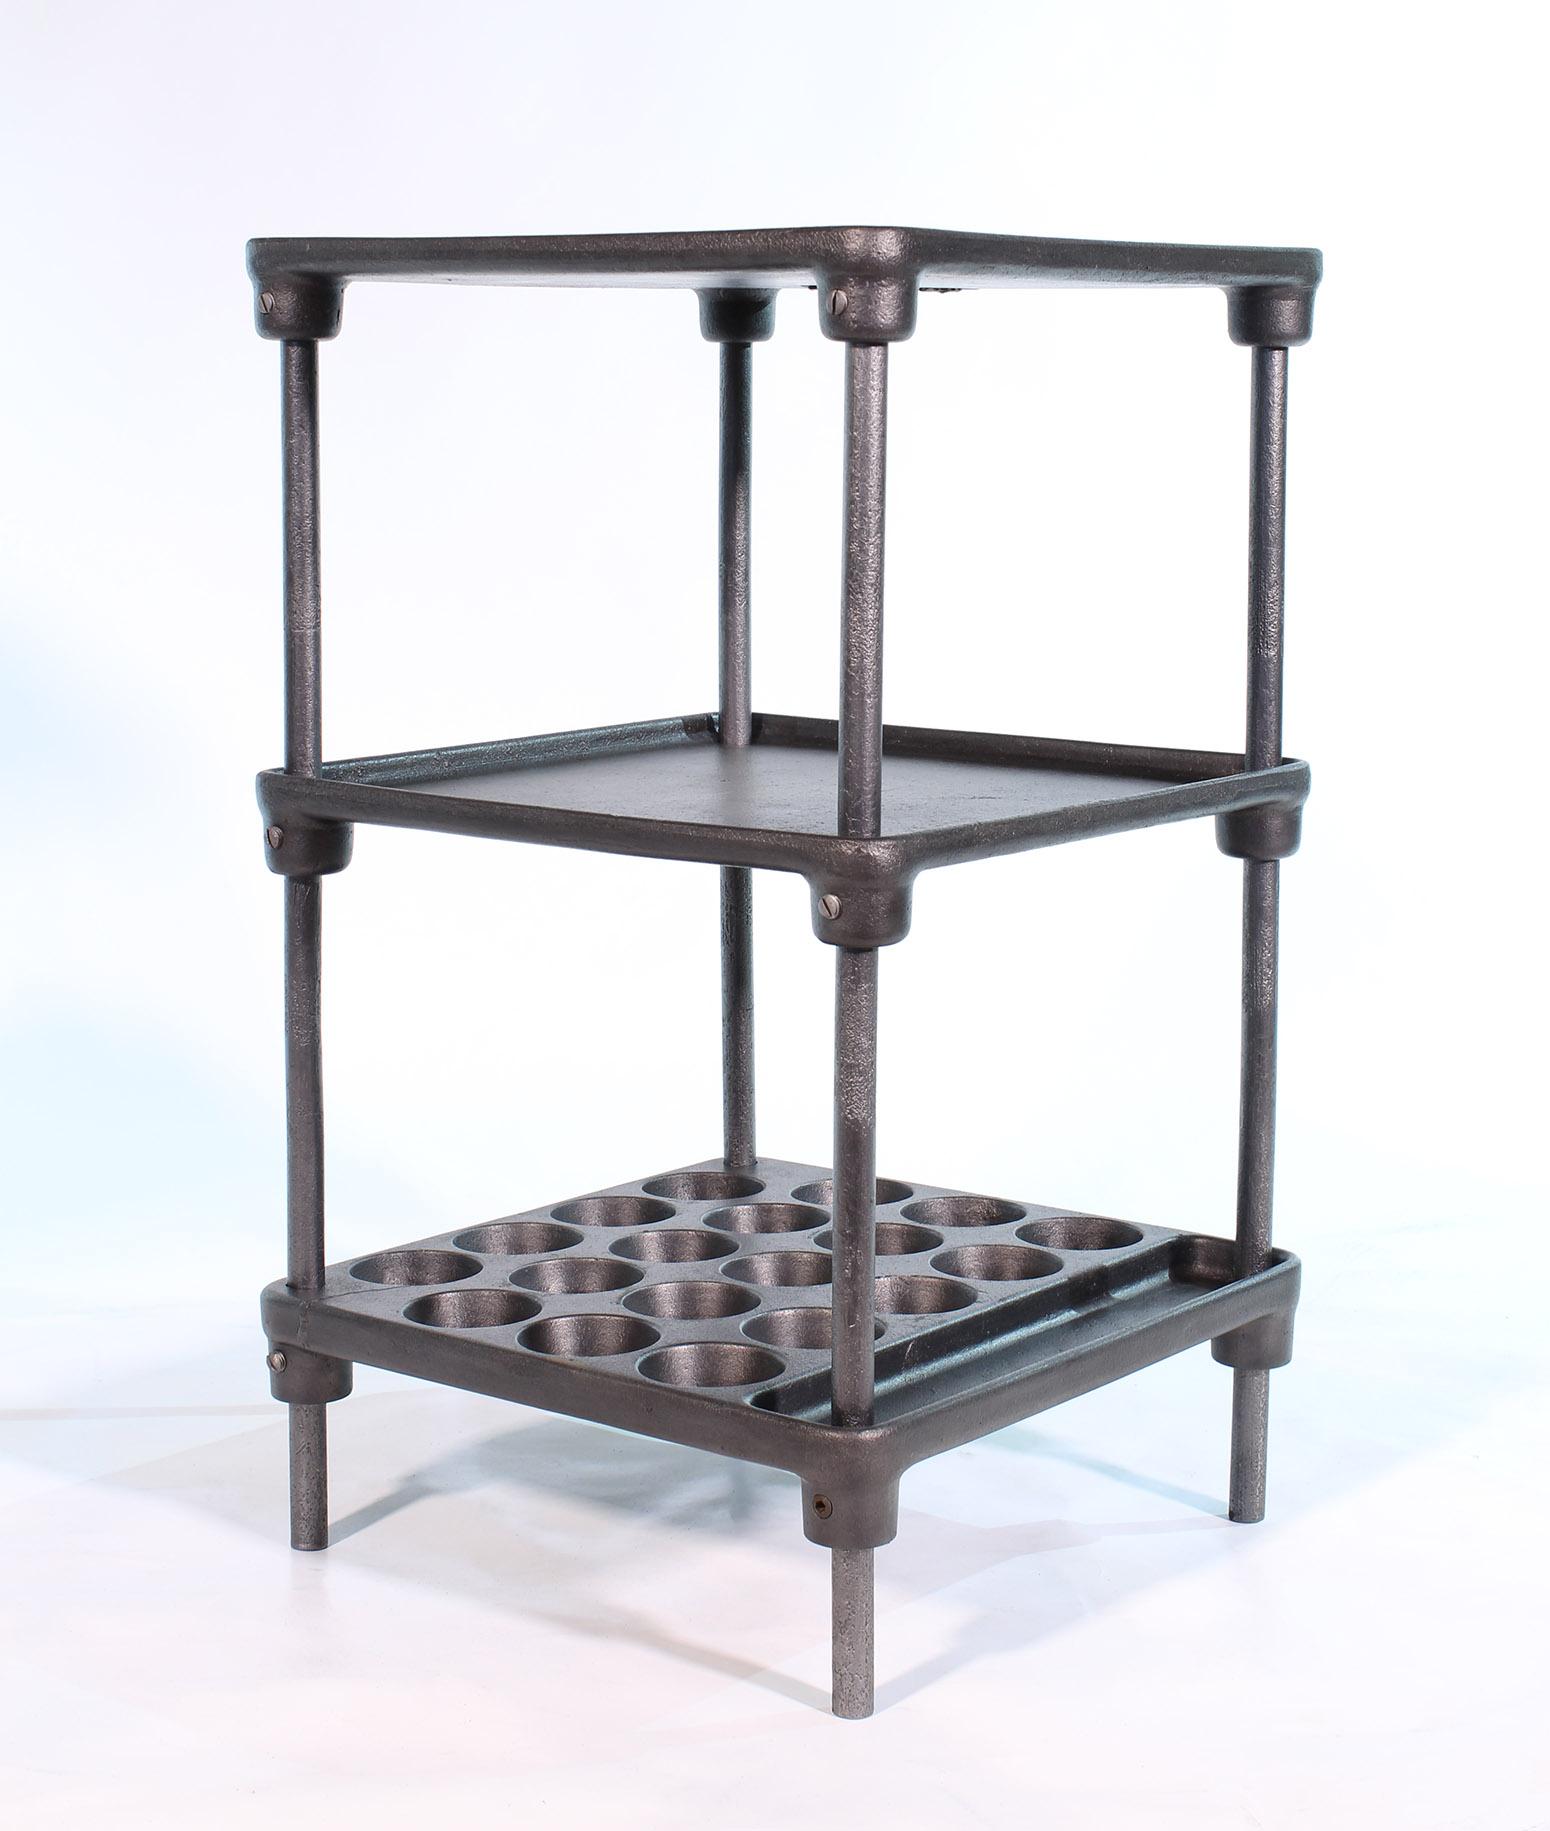 Authentic three-tier vintage industrial cast iron side or end machinists table, circa 1930s. Measures: 18